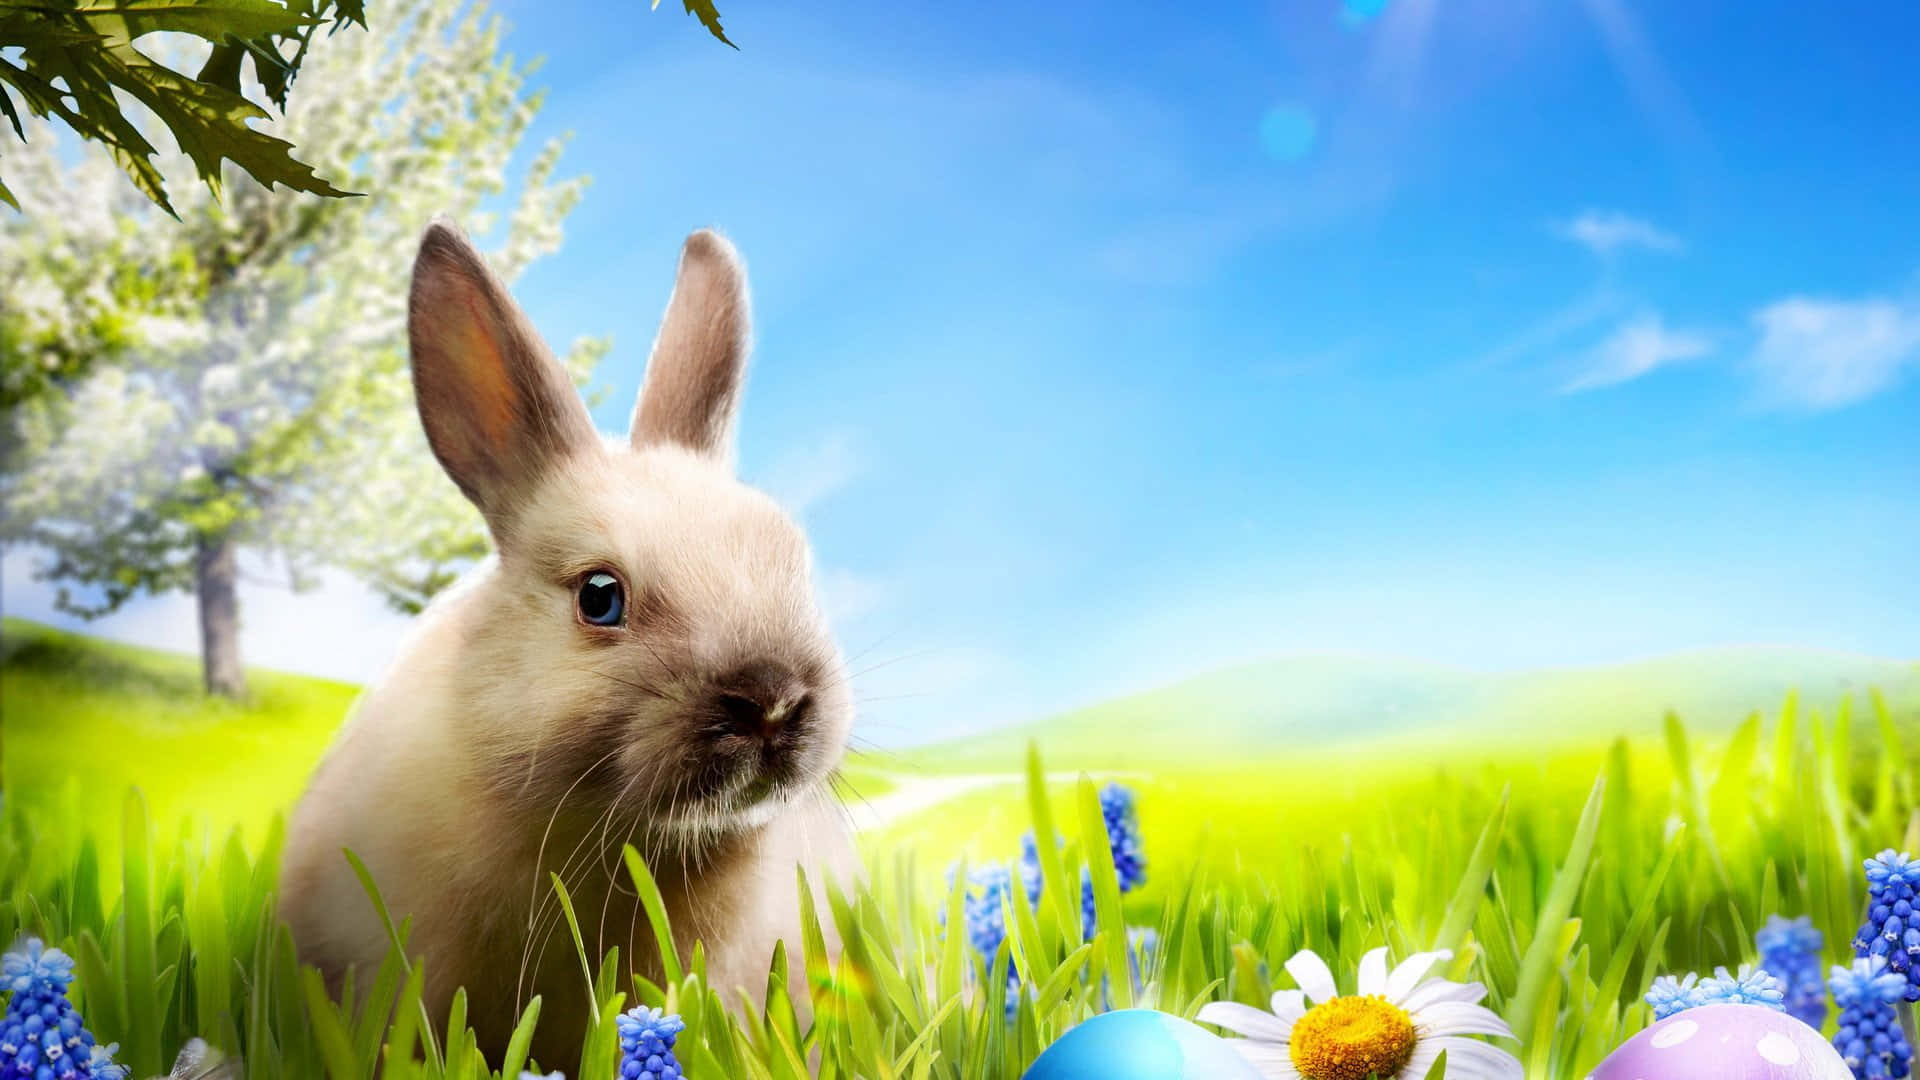 Easter Bunny On The Grass Field Picture